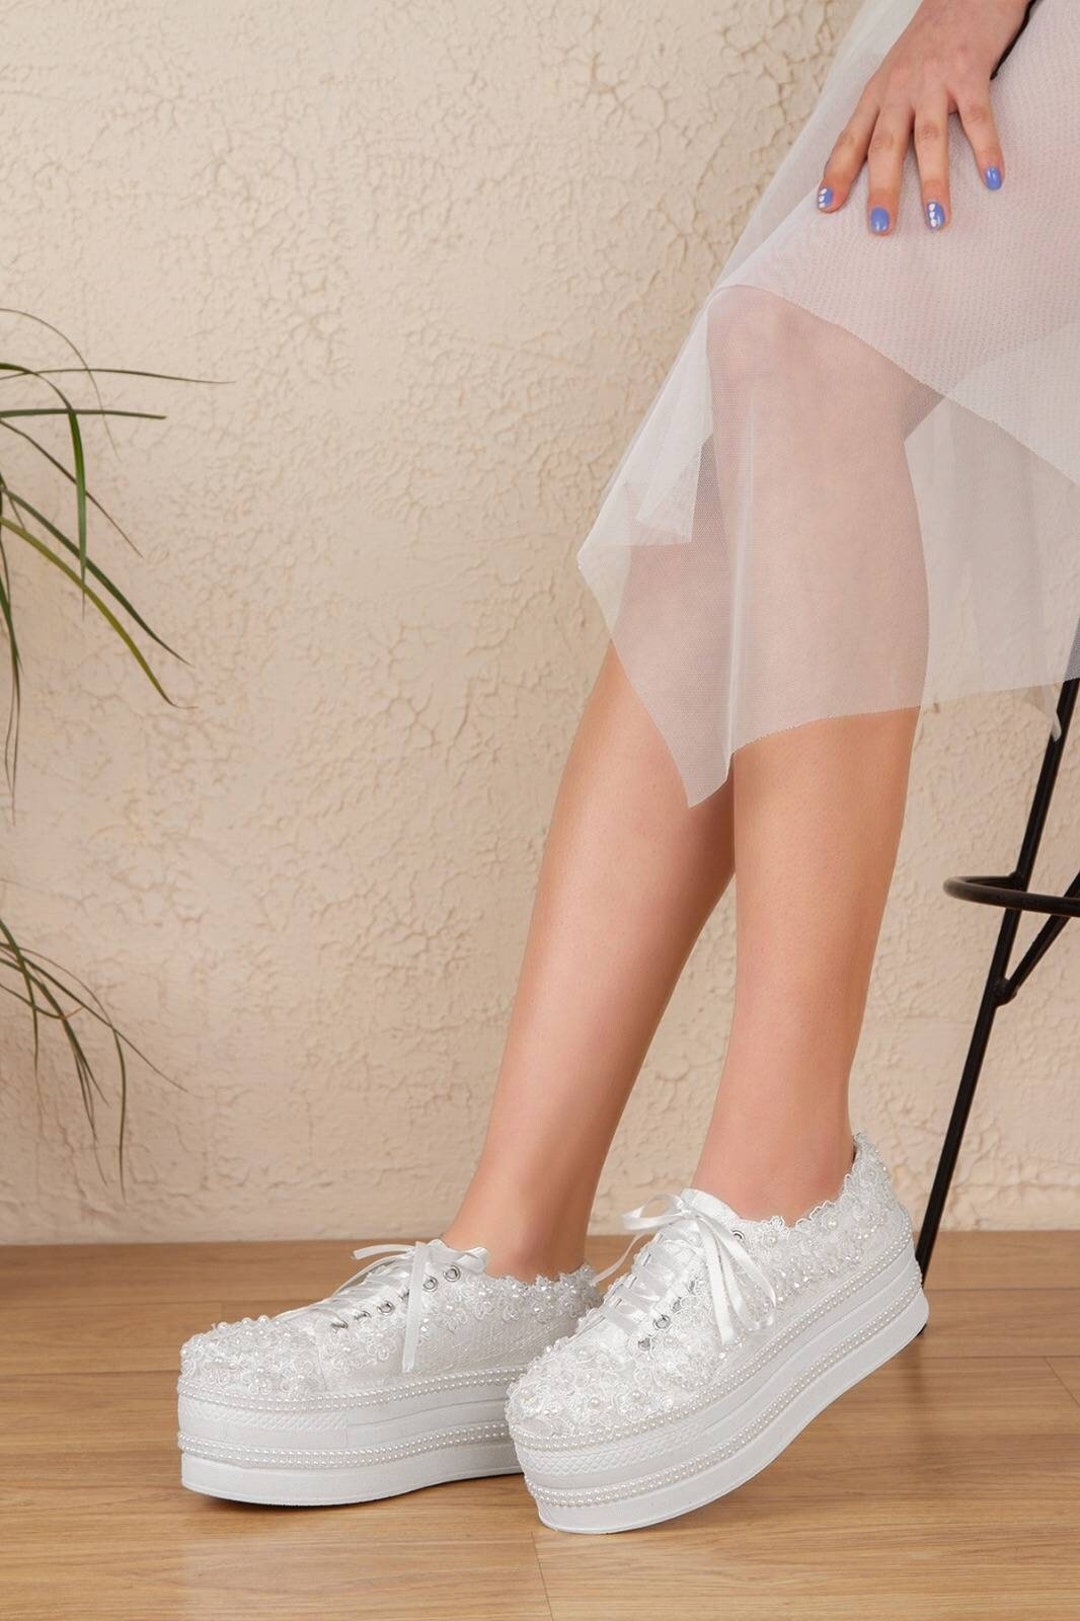 France Clipping 7 Cm Bride Sneakers Converse Shoes Etsy